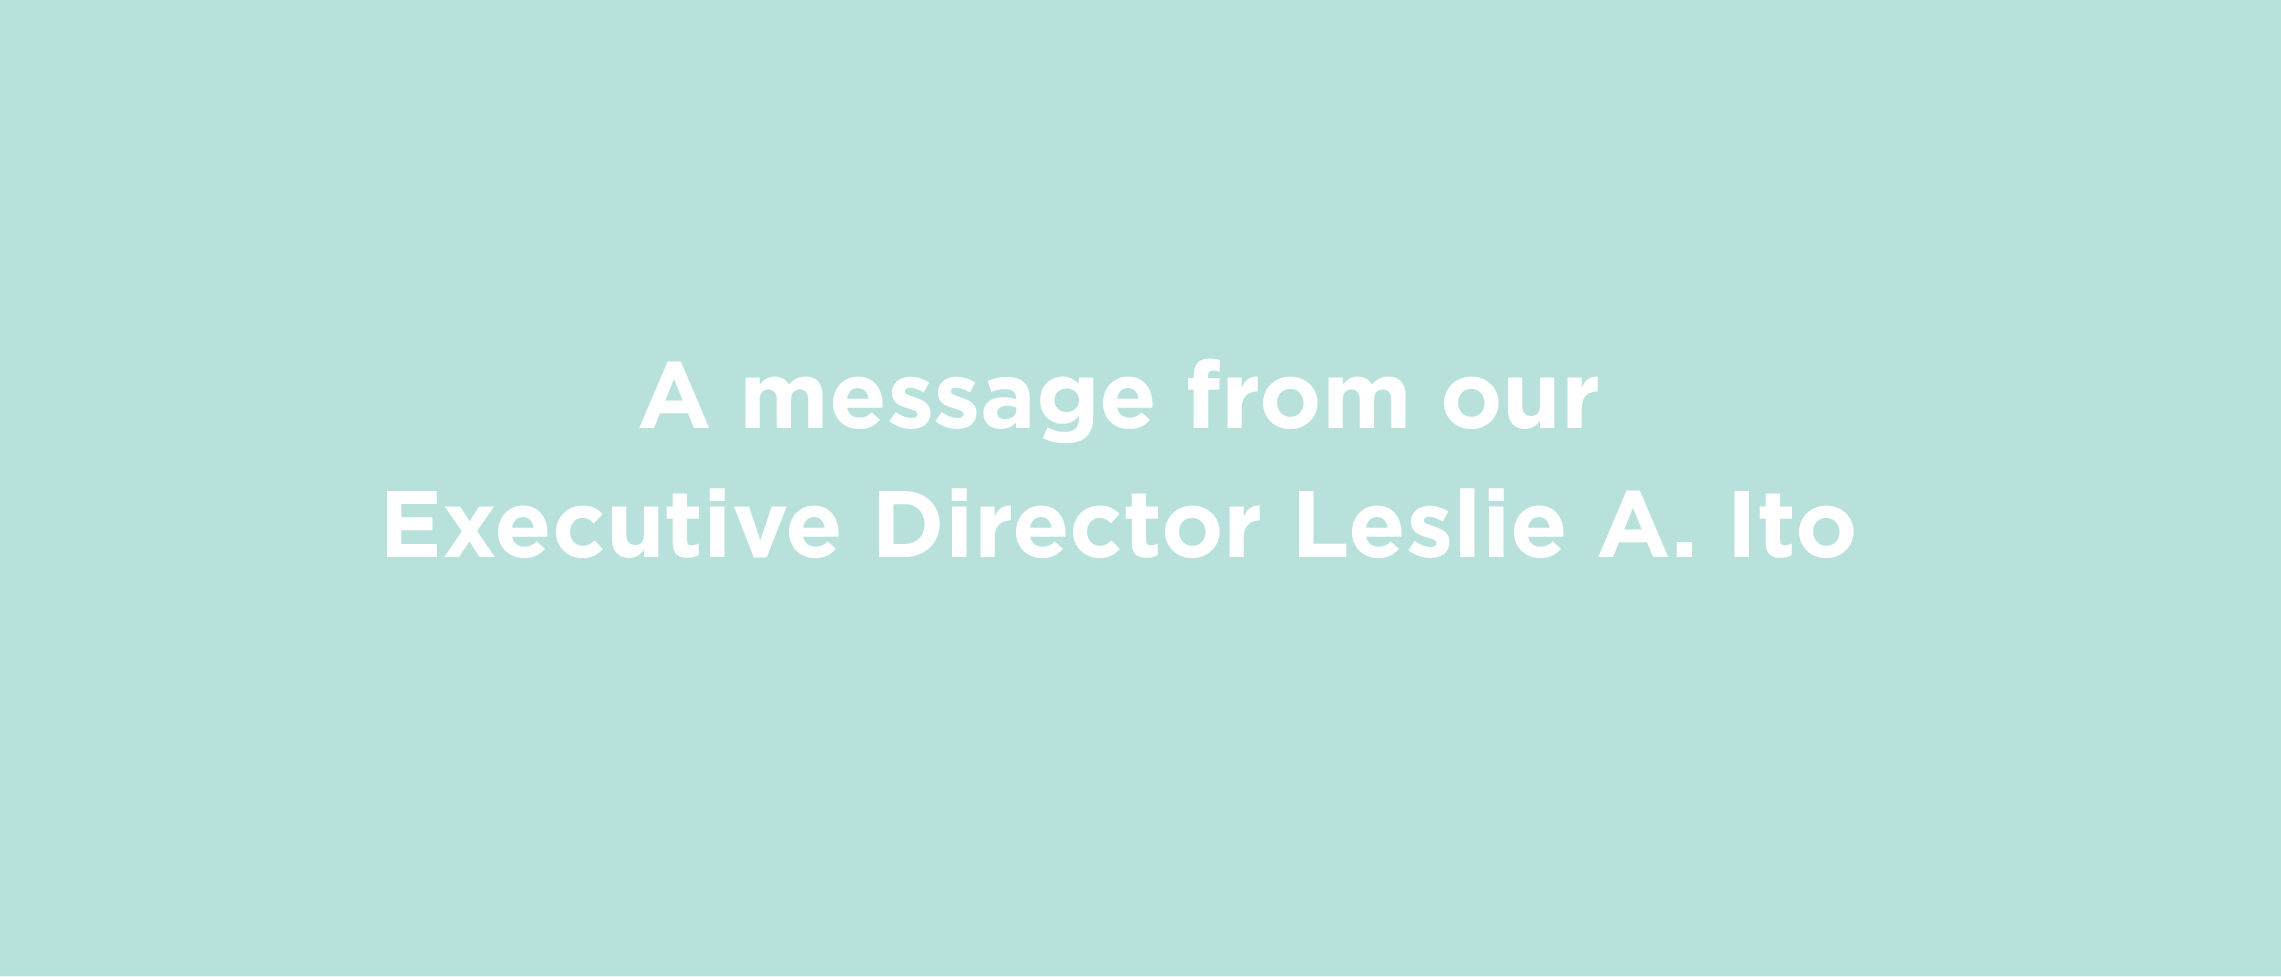 A Message from Our Executive Director Leslie A. Ito